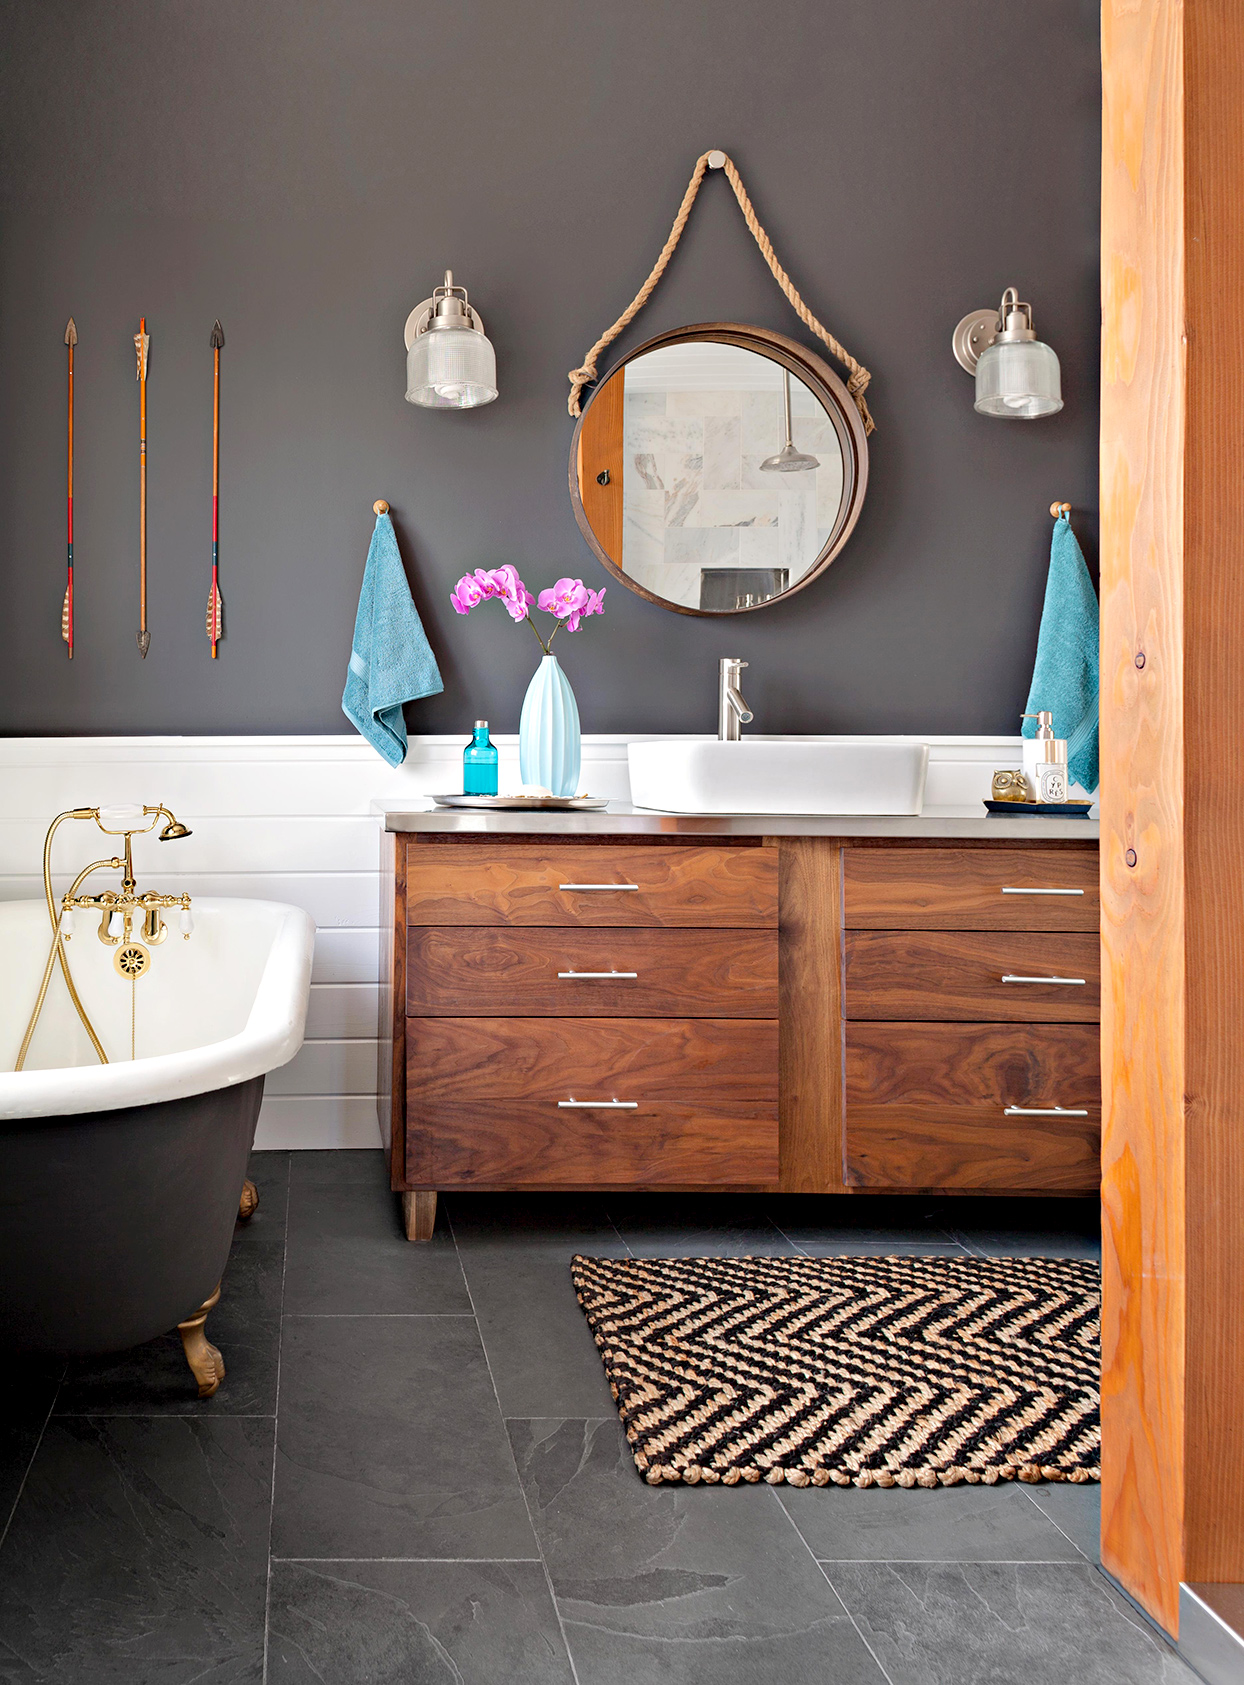 Create a Neutral Color Palette in the Bathroom